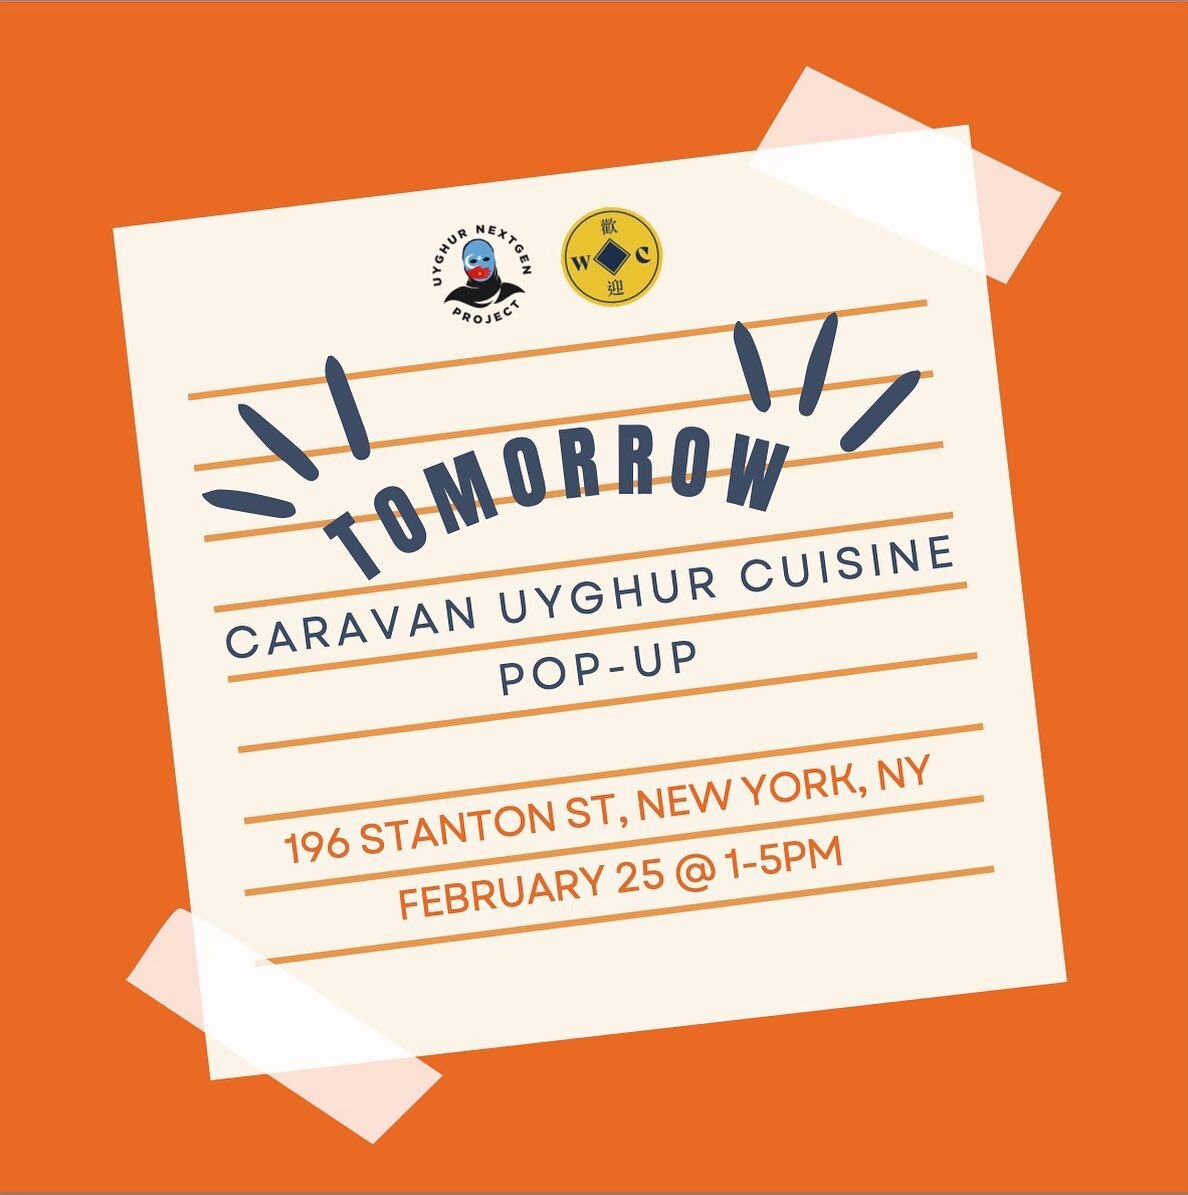 CARAVAN UYGHUR CUISINE POP-UP IS TOMORROW🤩🤩

PRE-ORDER NOW if you haven&rsquo;t already!! We&rsquo;re so excited to see you all there🥰🥰

#uyghur #uyghurfood #uyghurcuisine #nyc  #nycevents #nycpopup #popup #lowereastsidenyc